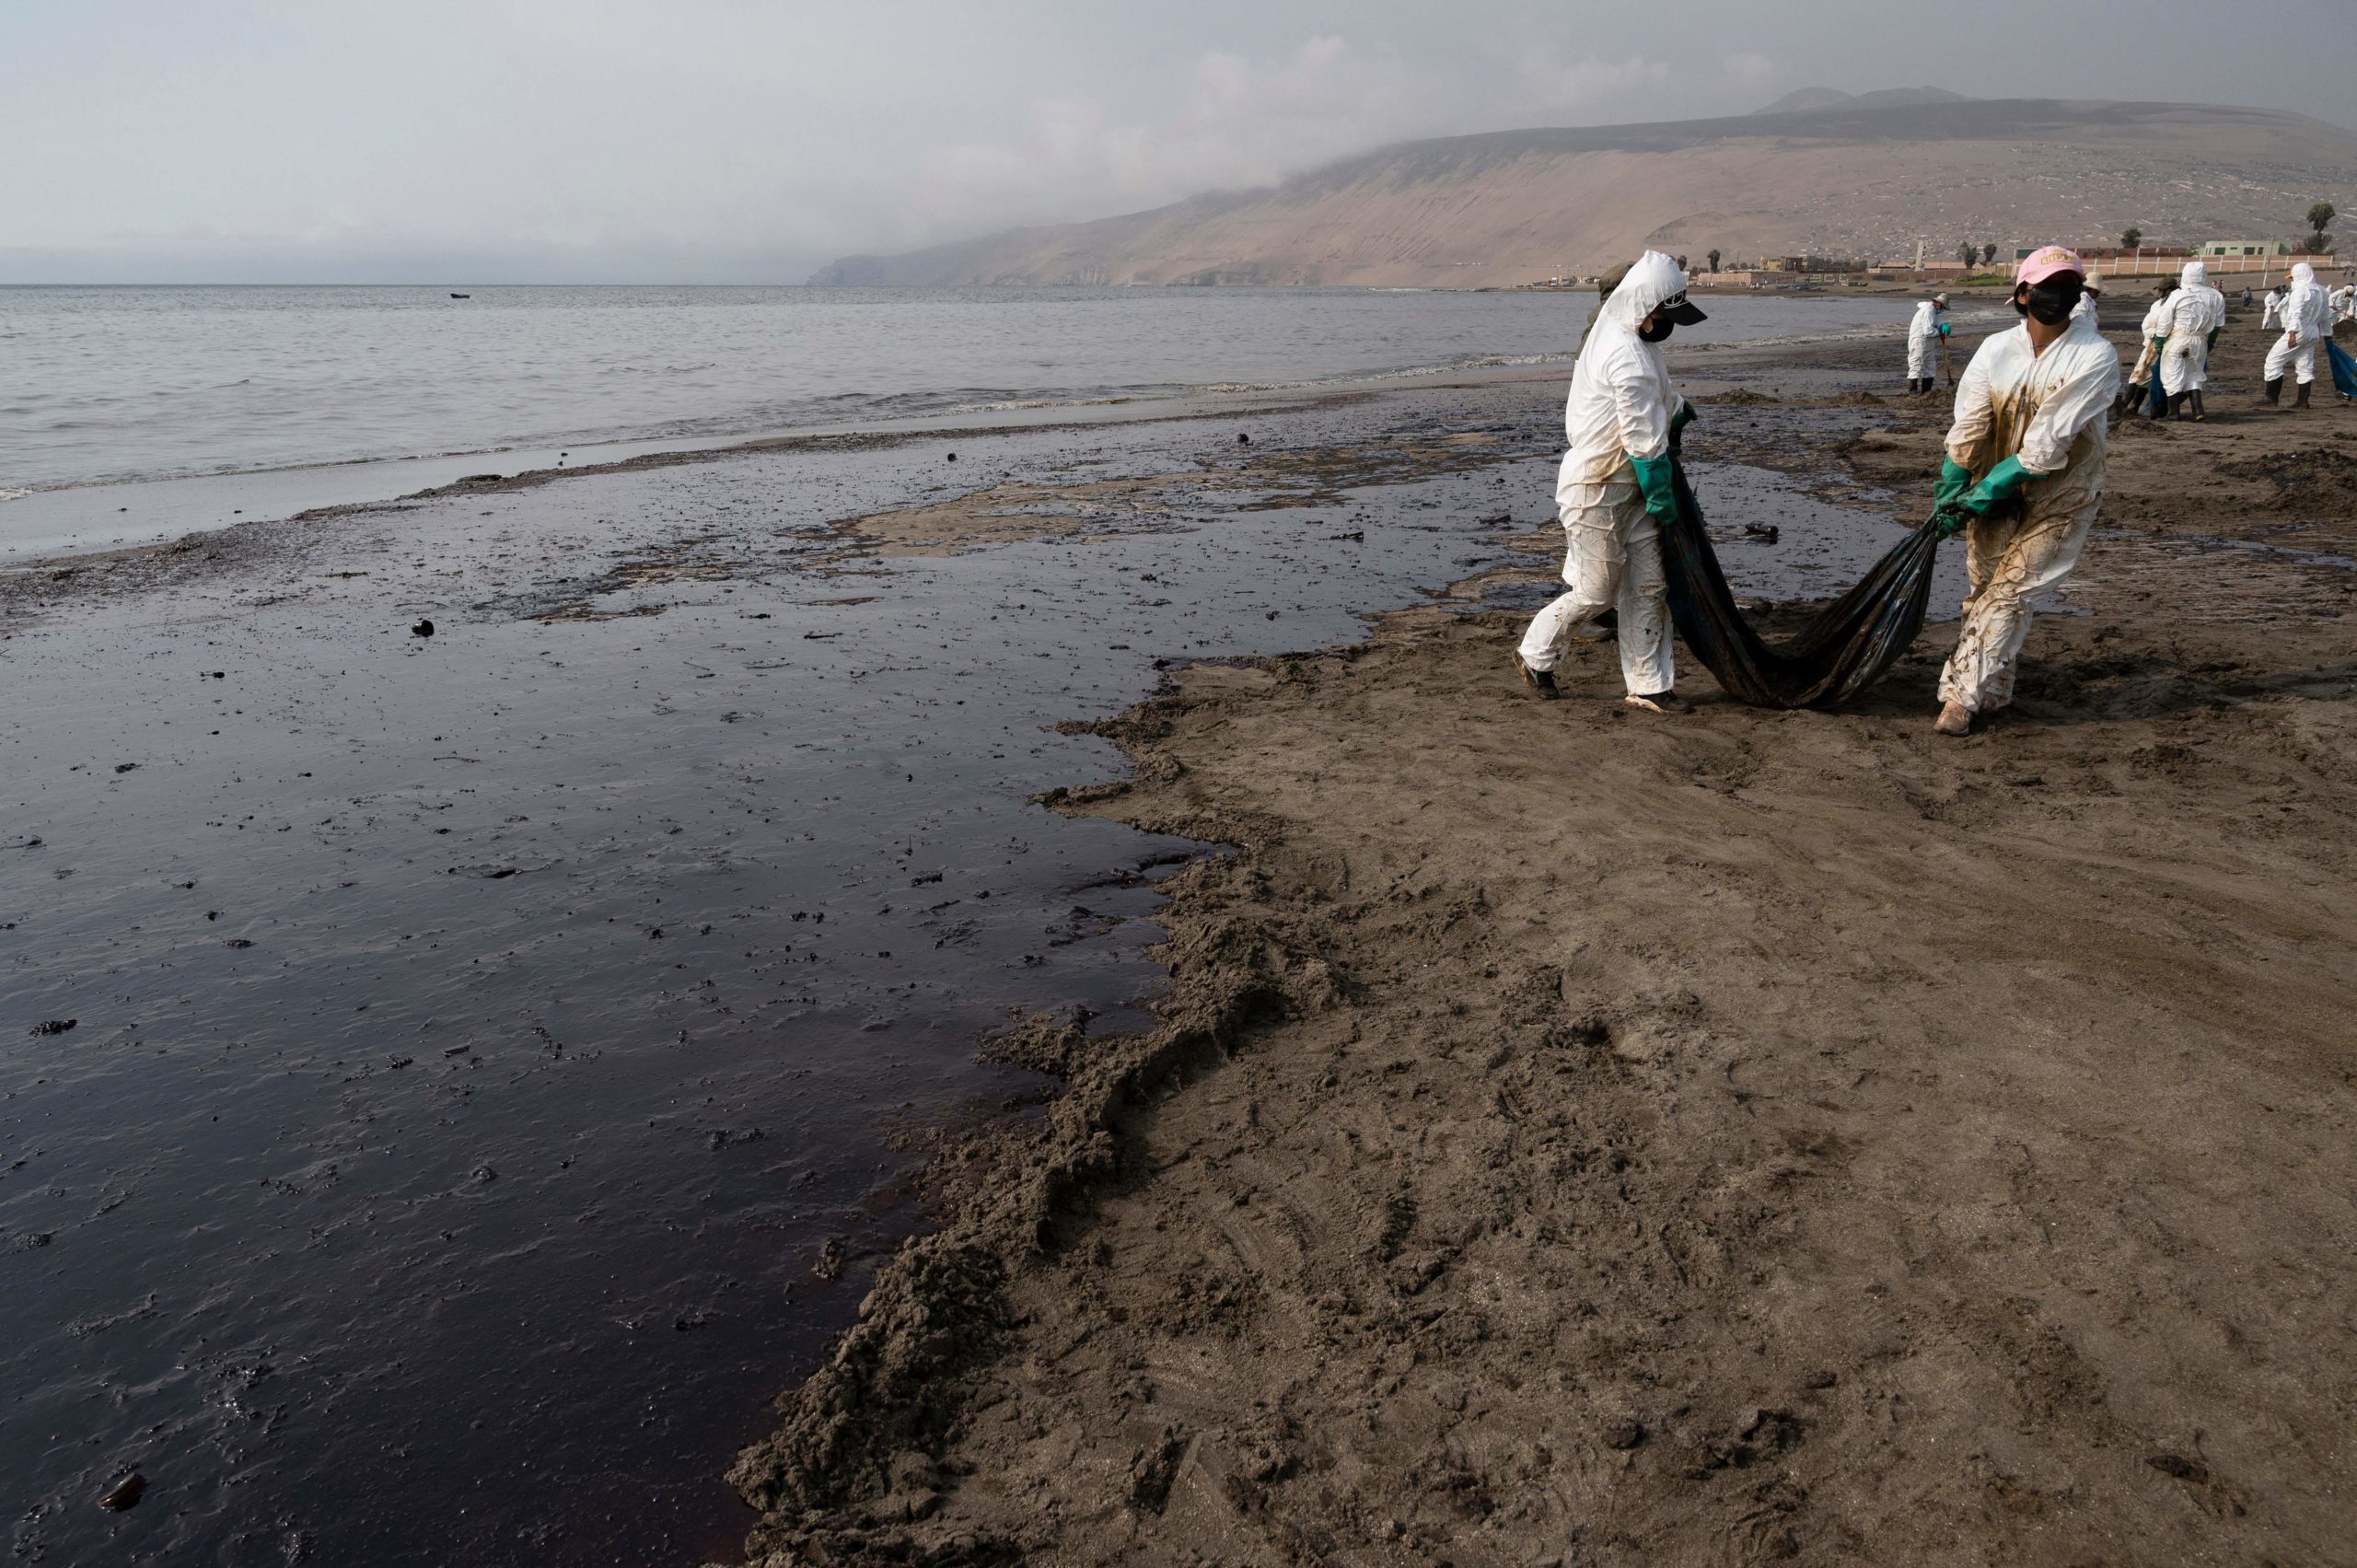 Cleaning crews work to remove oil from a beach annexed to the summer resort town of Ancon, northern Lima, on January 20, 2022 after a spill which occurred during the offloading process of the Italian-flagged tanker "Mare Doricum" at La Pampilla refinery caused by the abnormal waves recorded after the volcanic eruption in Tonga. (Photo by CRIS BOURONCLE/AFP via Getty Images)